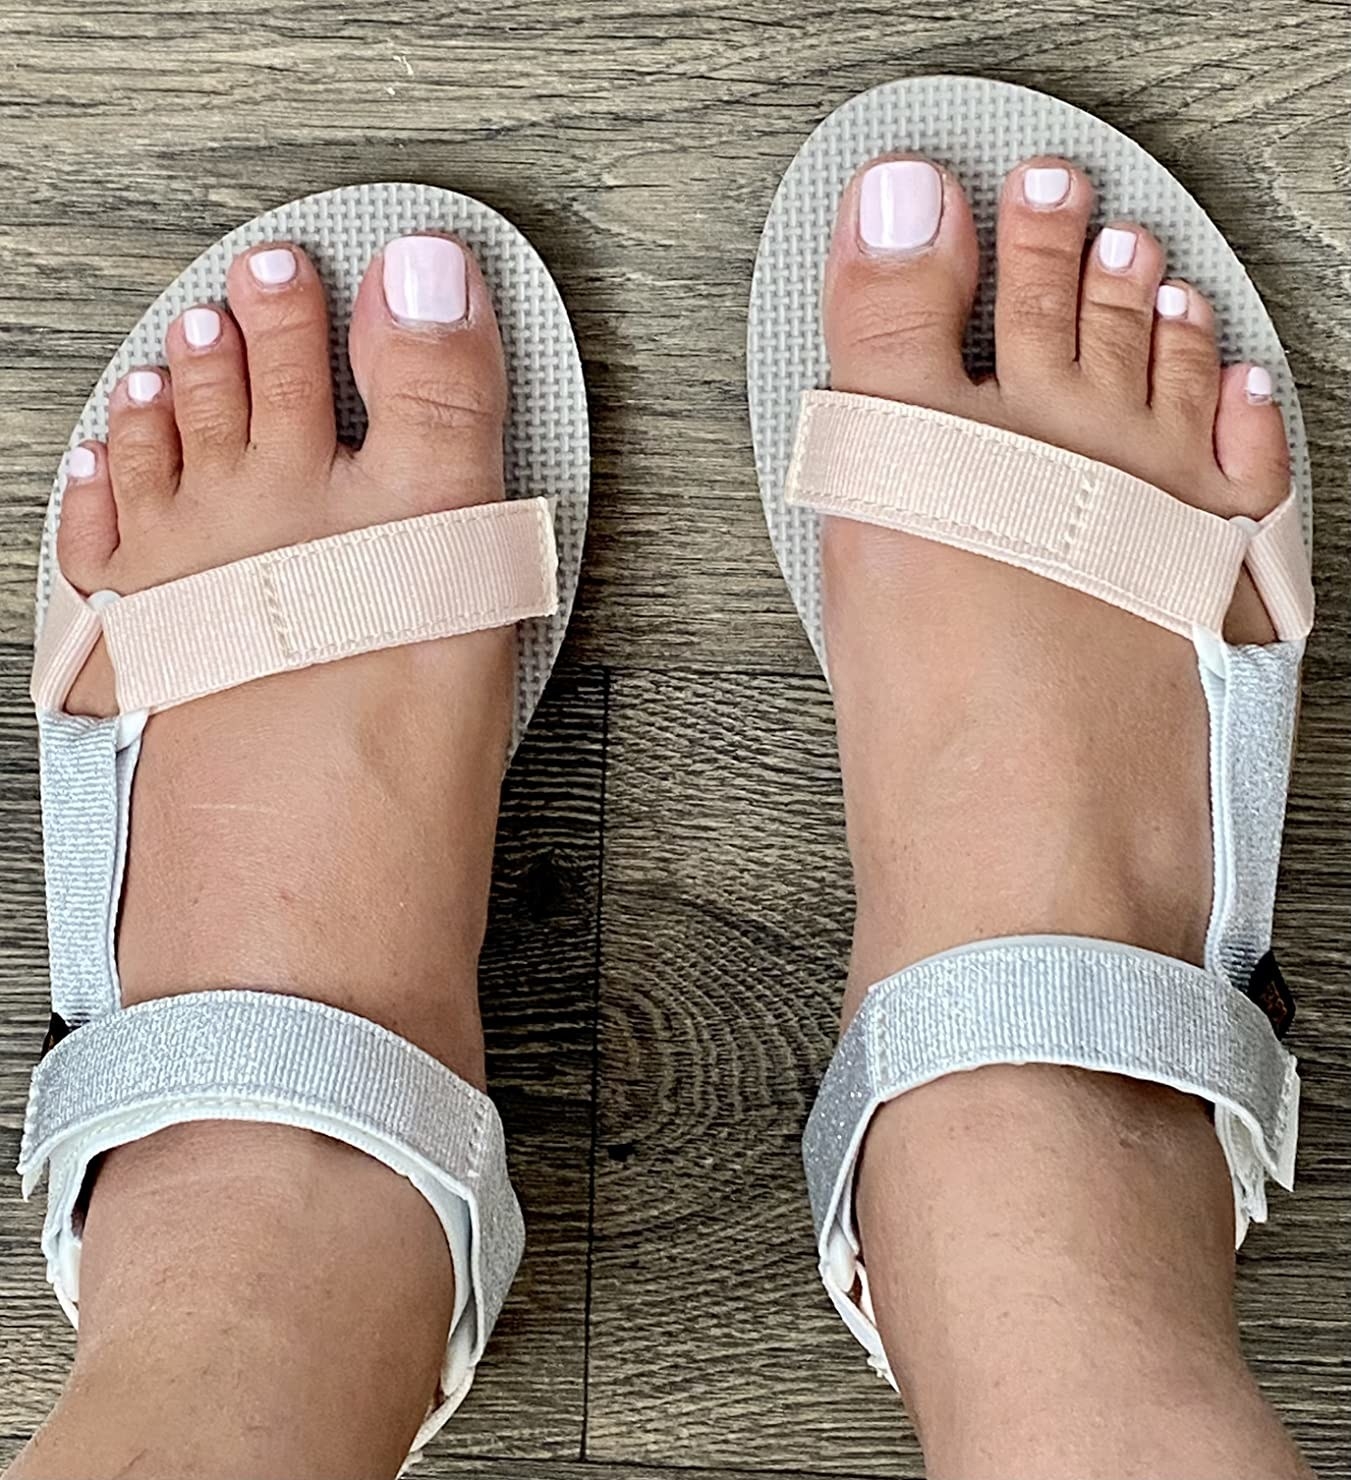 A reviewer wearing white sandals